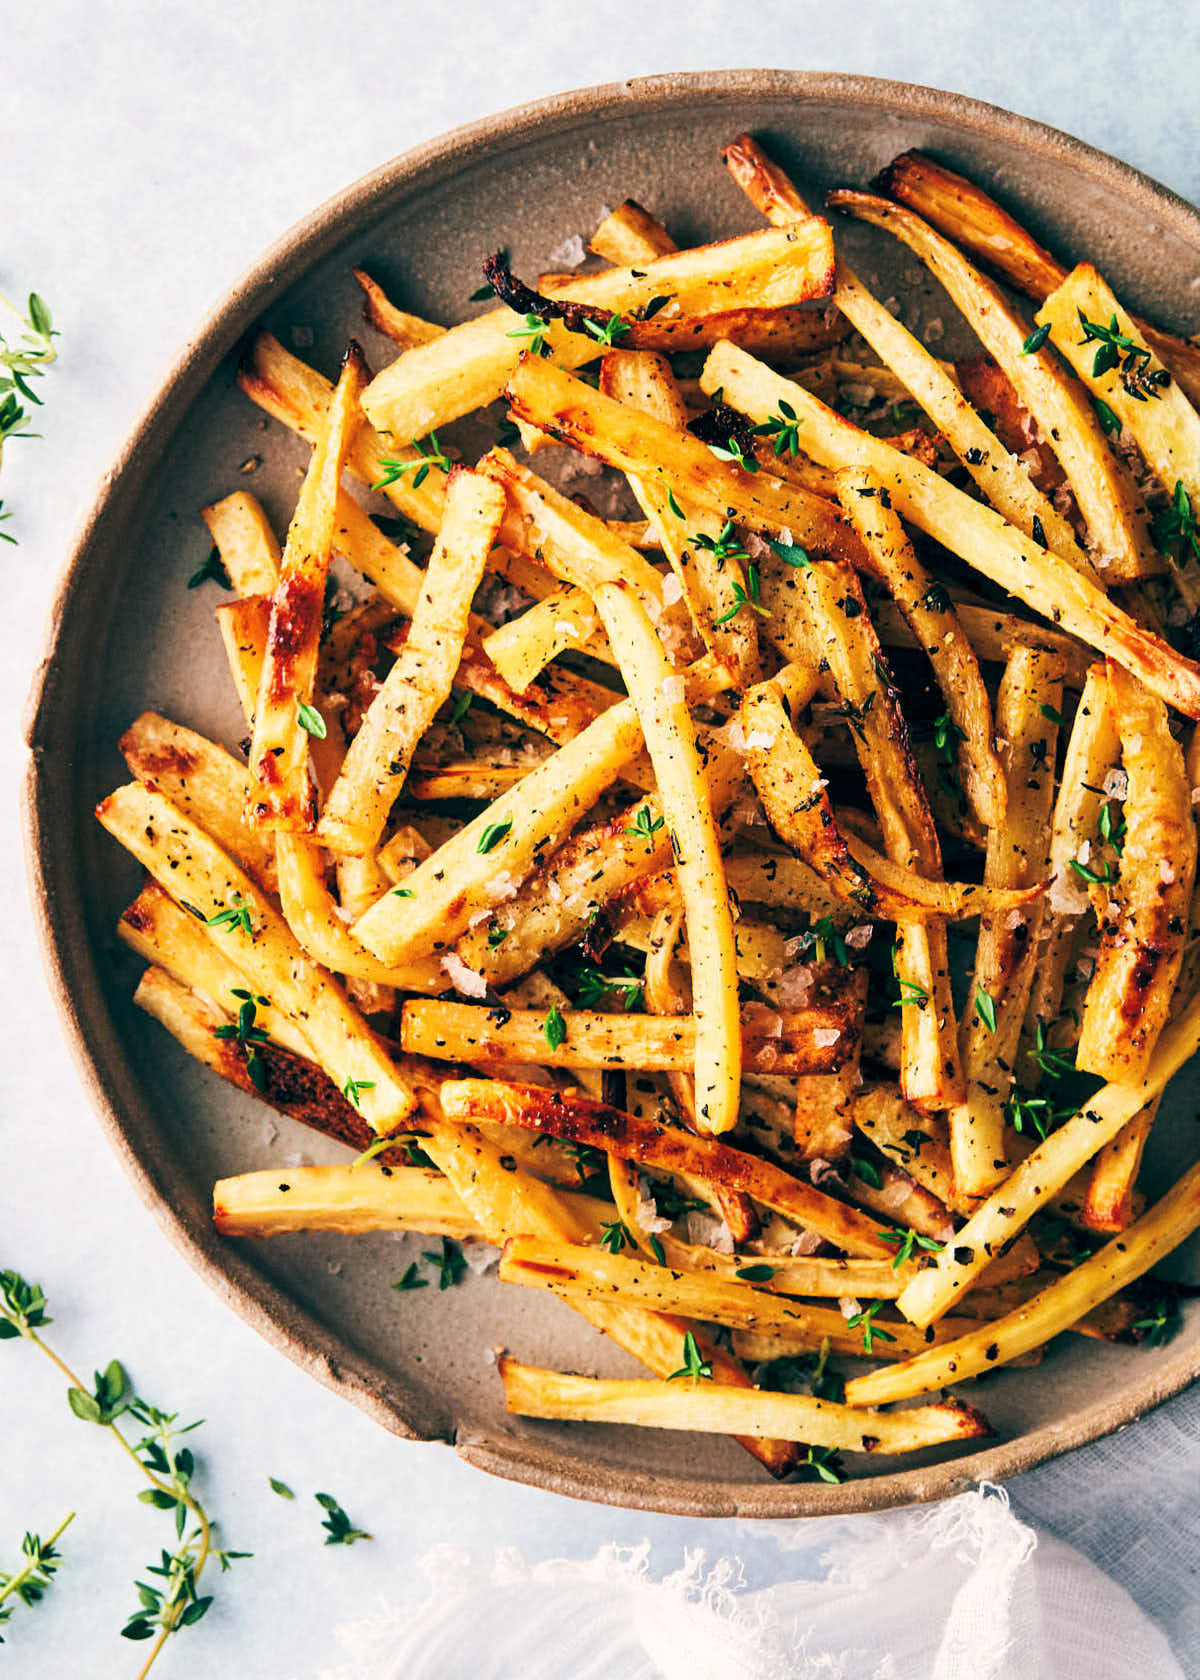 Plate of parsnip shoestring fries topped with thyme and flaky salt